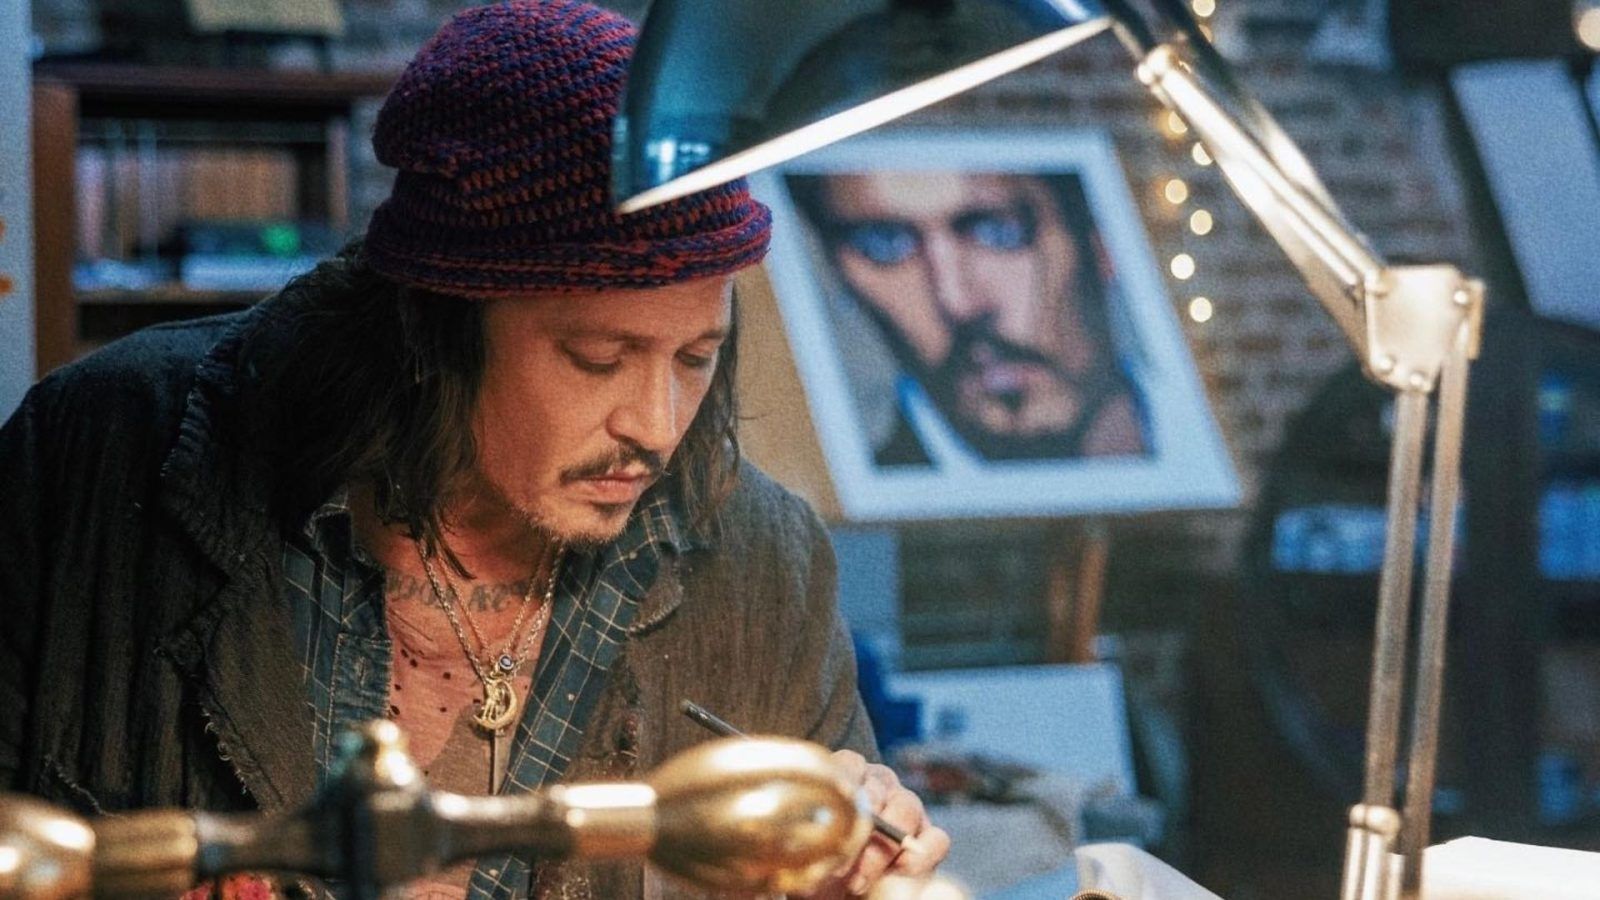 Highest-rated Johnny Depp movies, with an IMDb rating of 7.5 and above